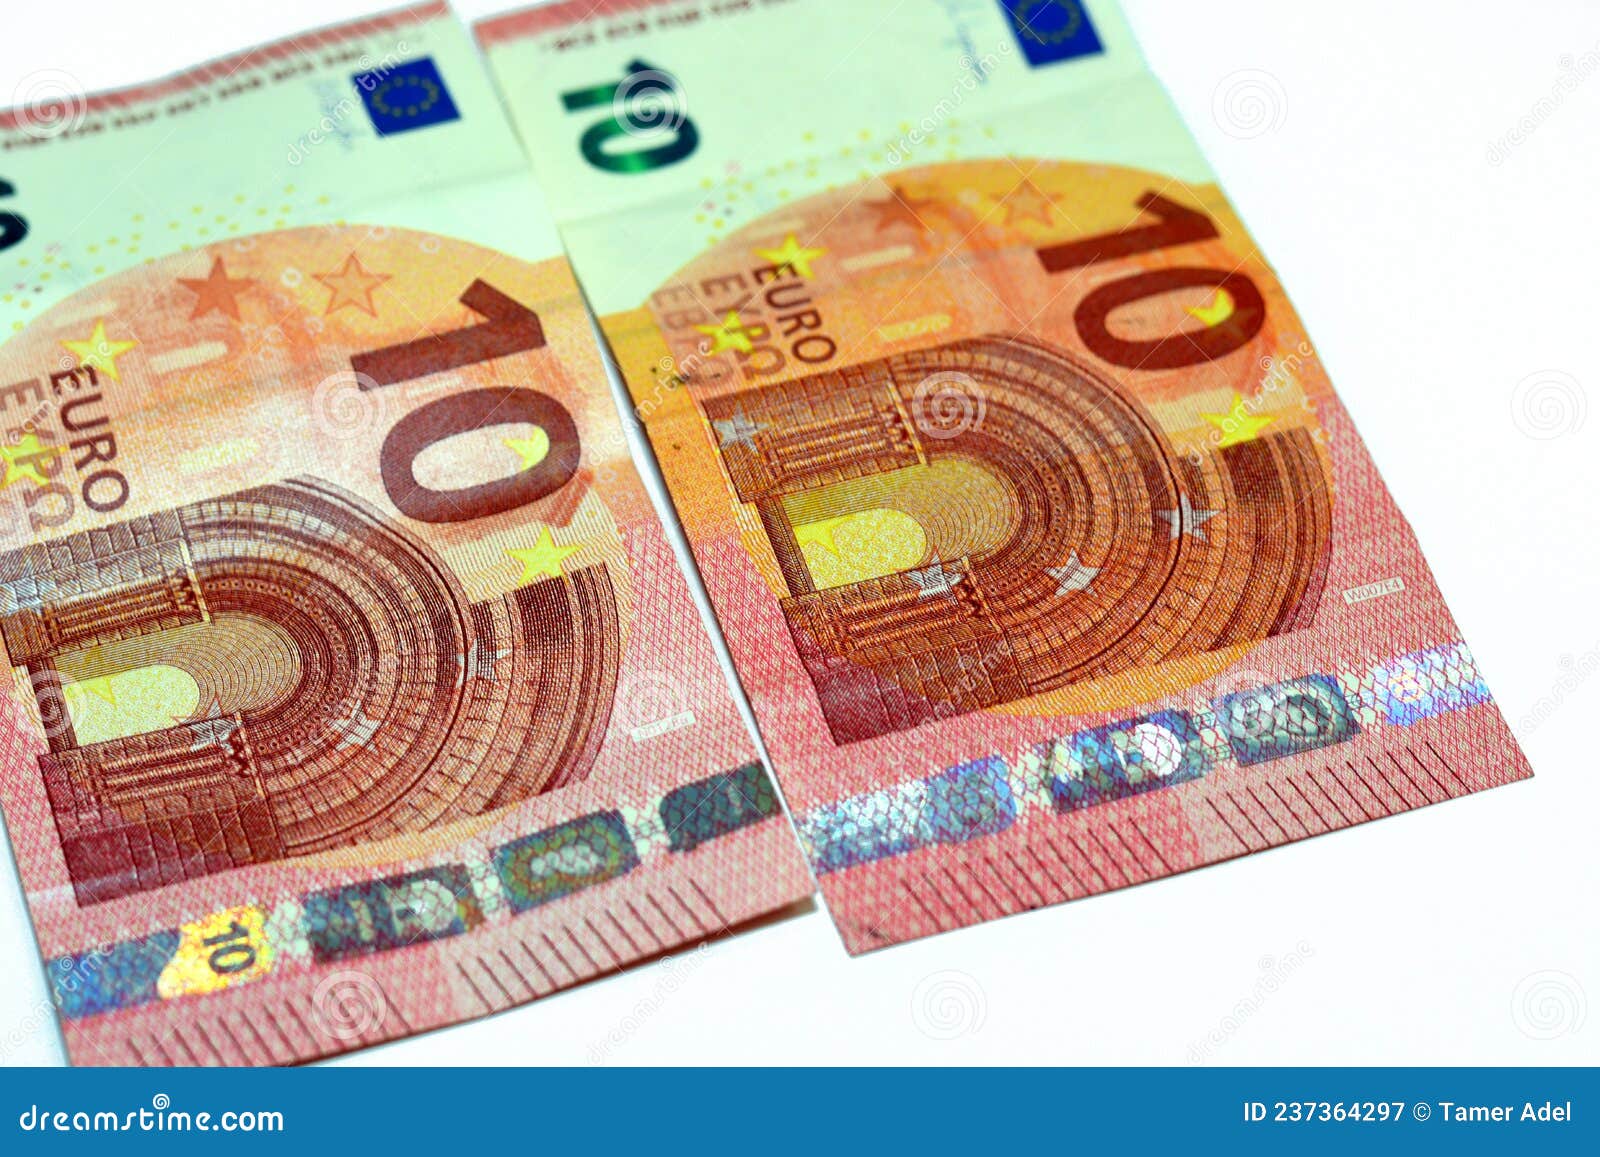 Obverse Side of â‚¬10 Ten Euro Bill Banknote, the Currency of the